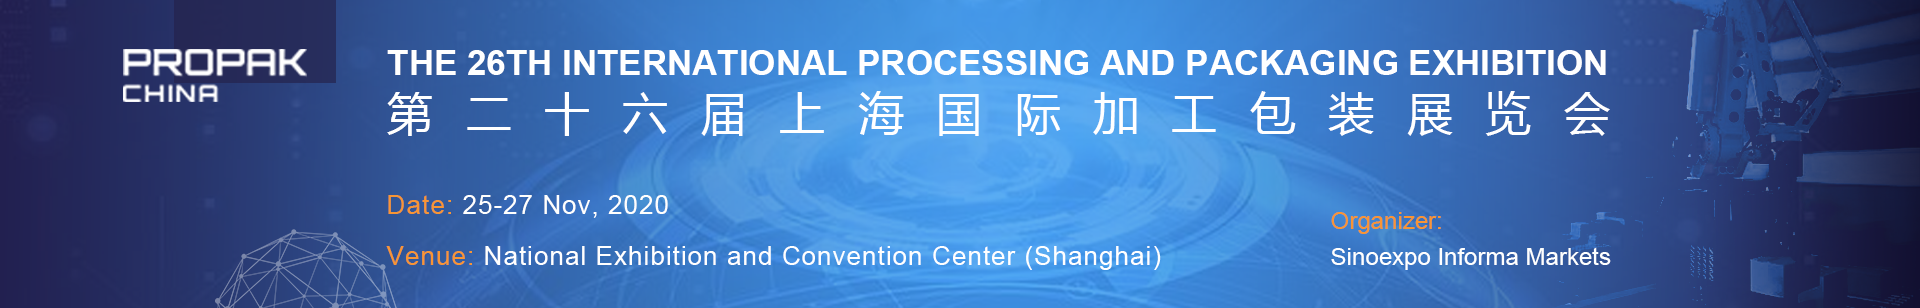 The 26th International Processing and Packaging Exhibition